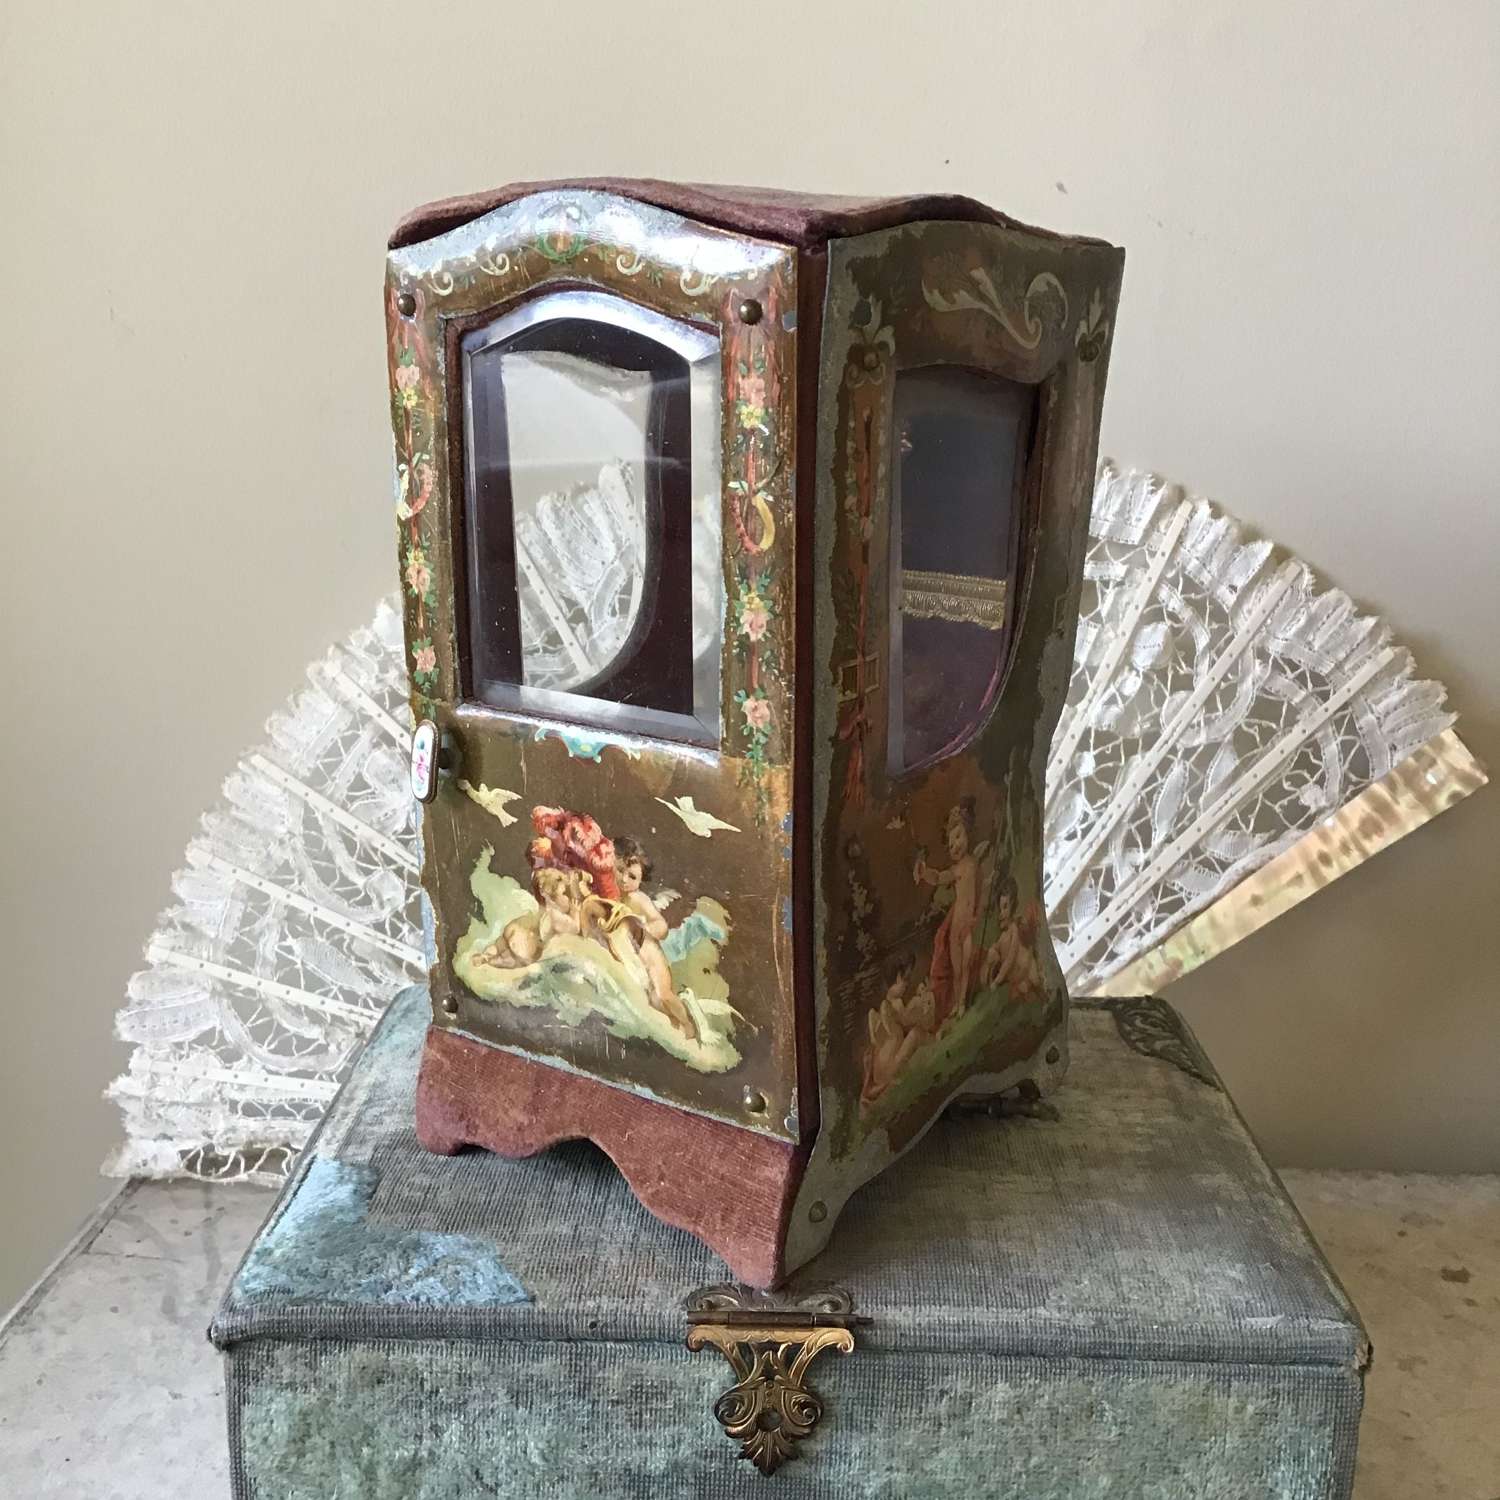 19th century antique watch case in the form of a sedan chair